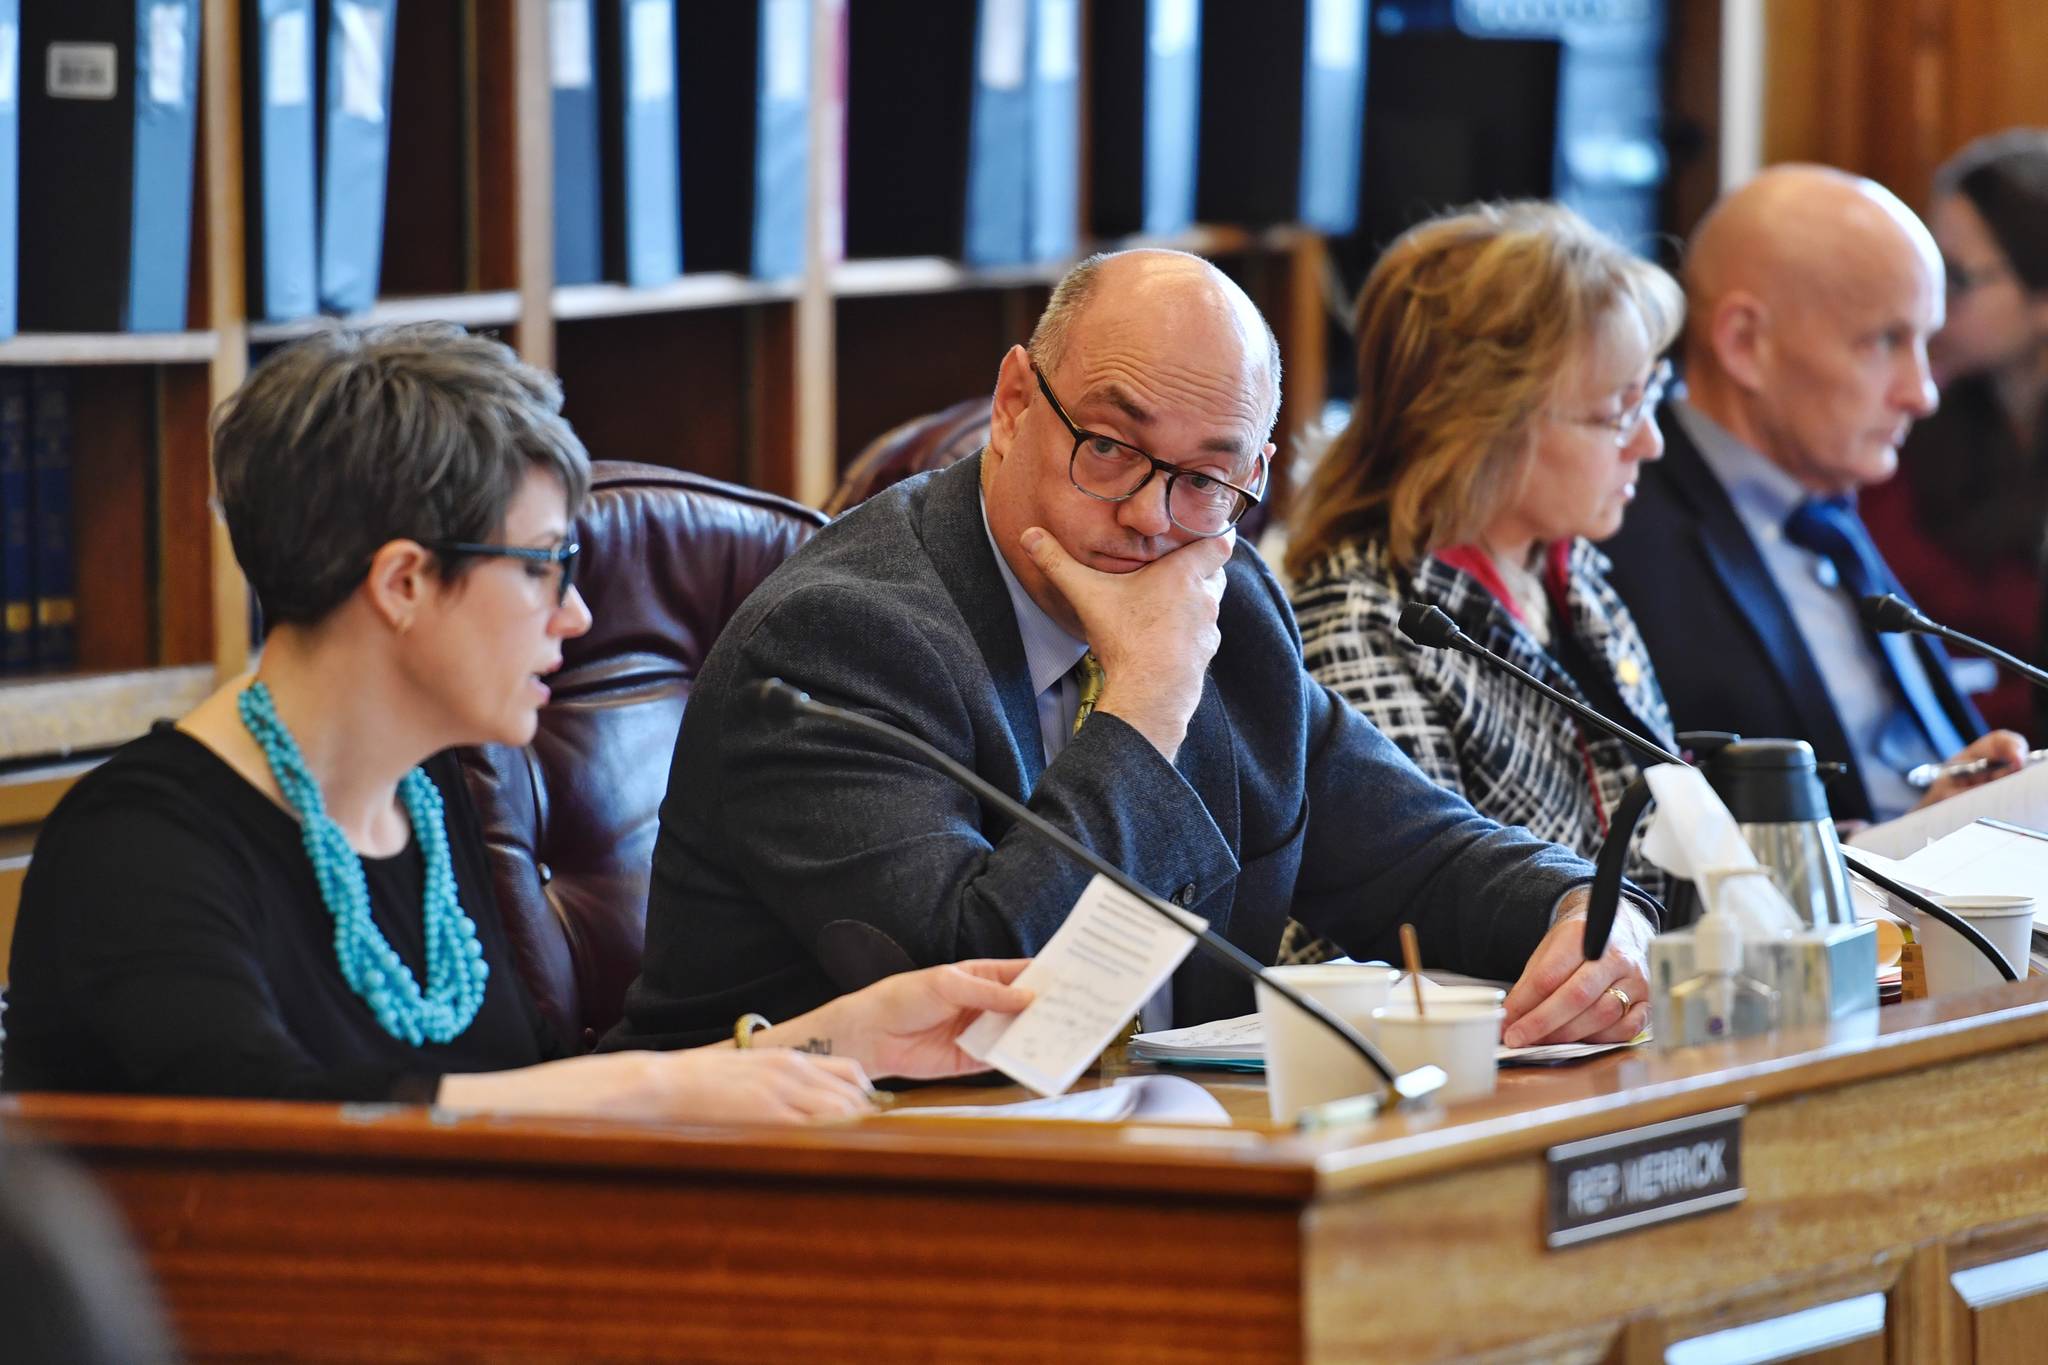 Rep. Andy Josephson, D-Anchorage, second from left, listens to Rep. Kelly Merrick, R-Eagle River, as she reads an amendment to repeal the Ocean Ranger program during a House Finance Committee meeting at the Capitol on Thursday, April 4, 2019. (Michael Penn | Juneau Empire)